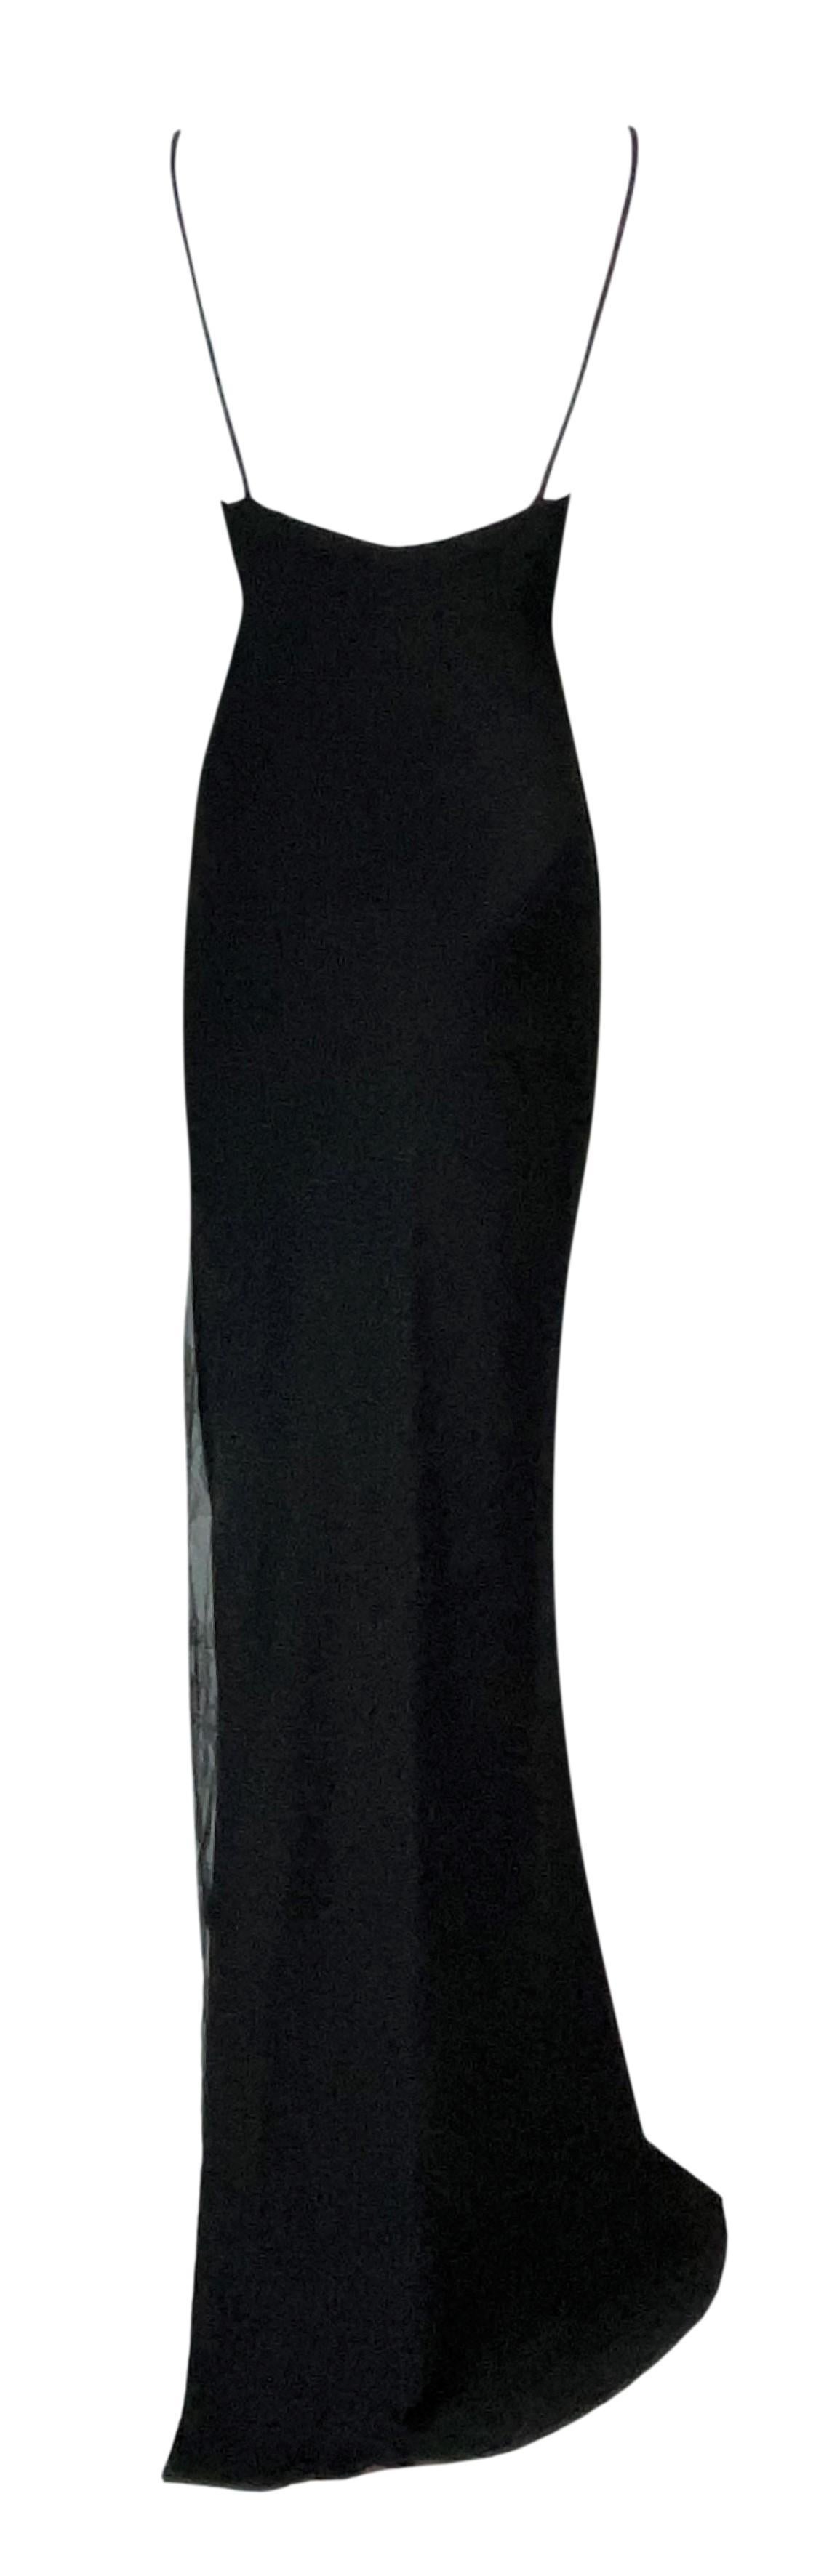 S/S 1999 Christian Dior John Galliano Black Long High Slit Maxi Lace Dress In Excellent Condition In Yukon, OK